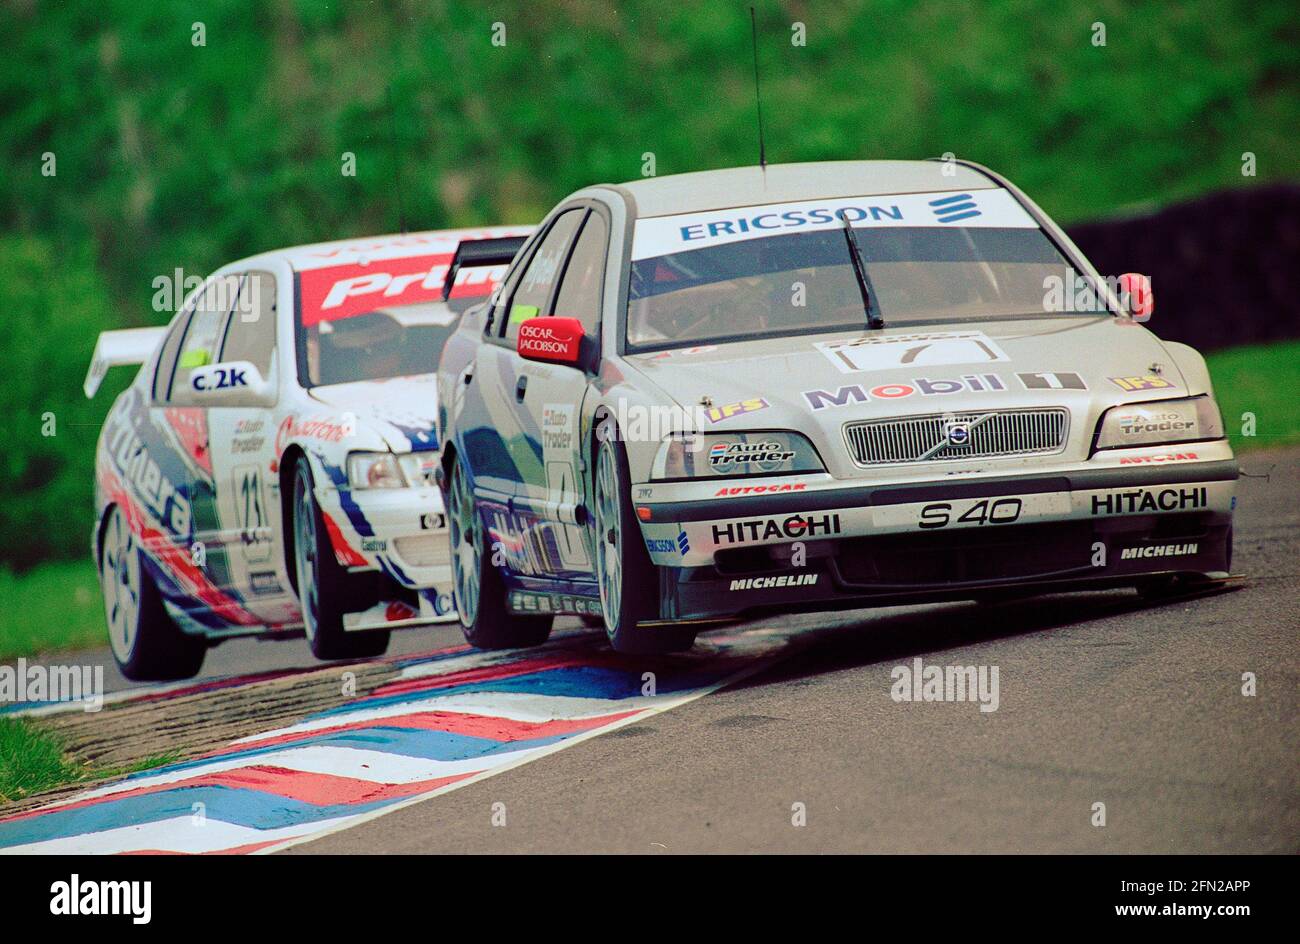 Rickard Rydell races in the 5th and 6th round at Thruxton race circuit in the 1999 BTCC championship driving a Volvo S40 Stock Photo